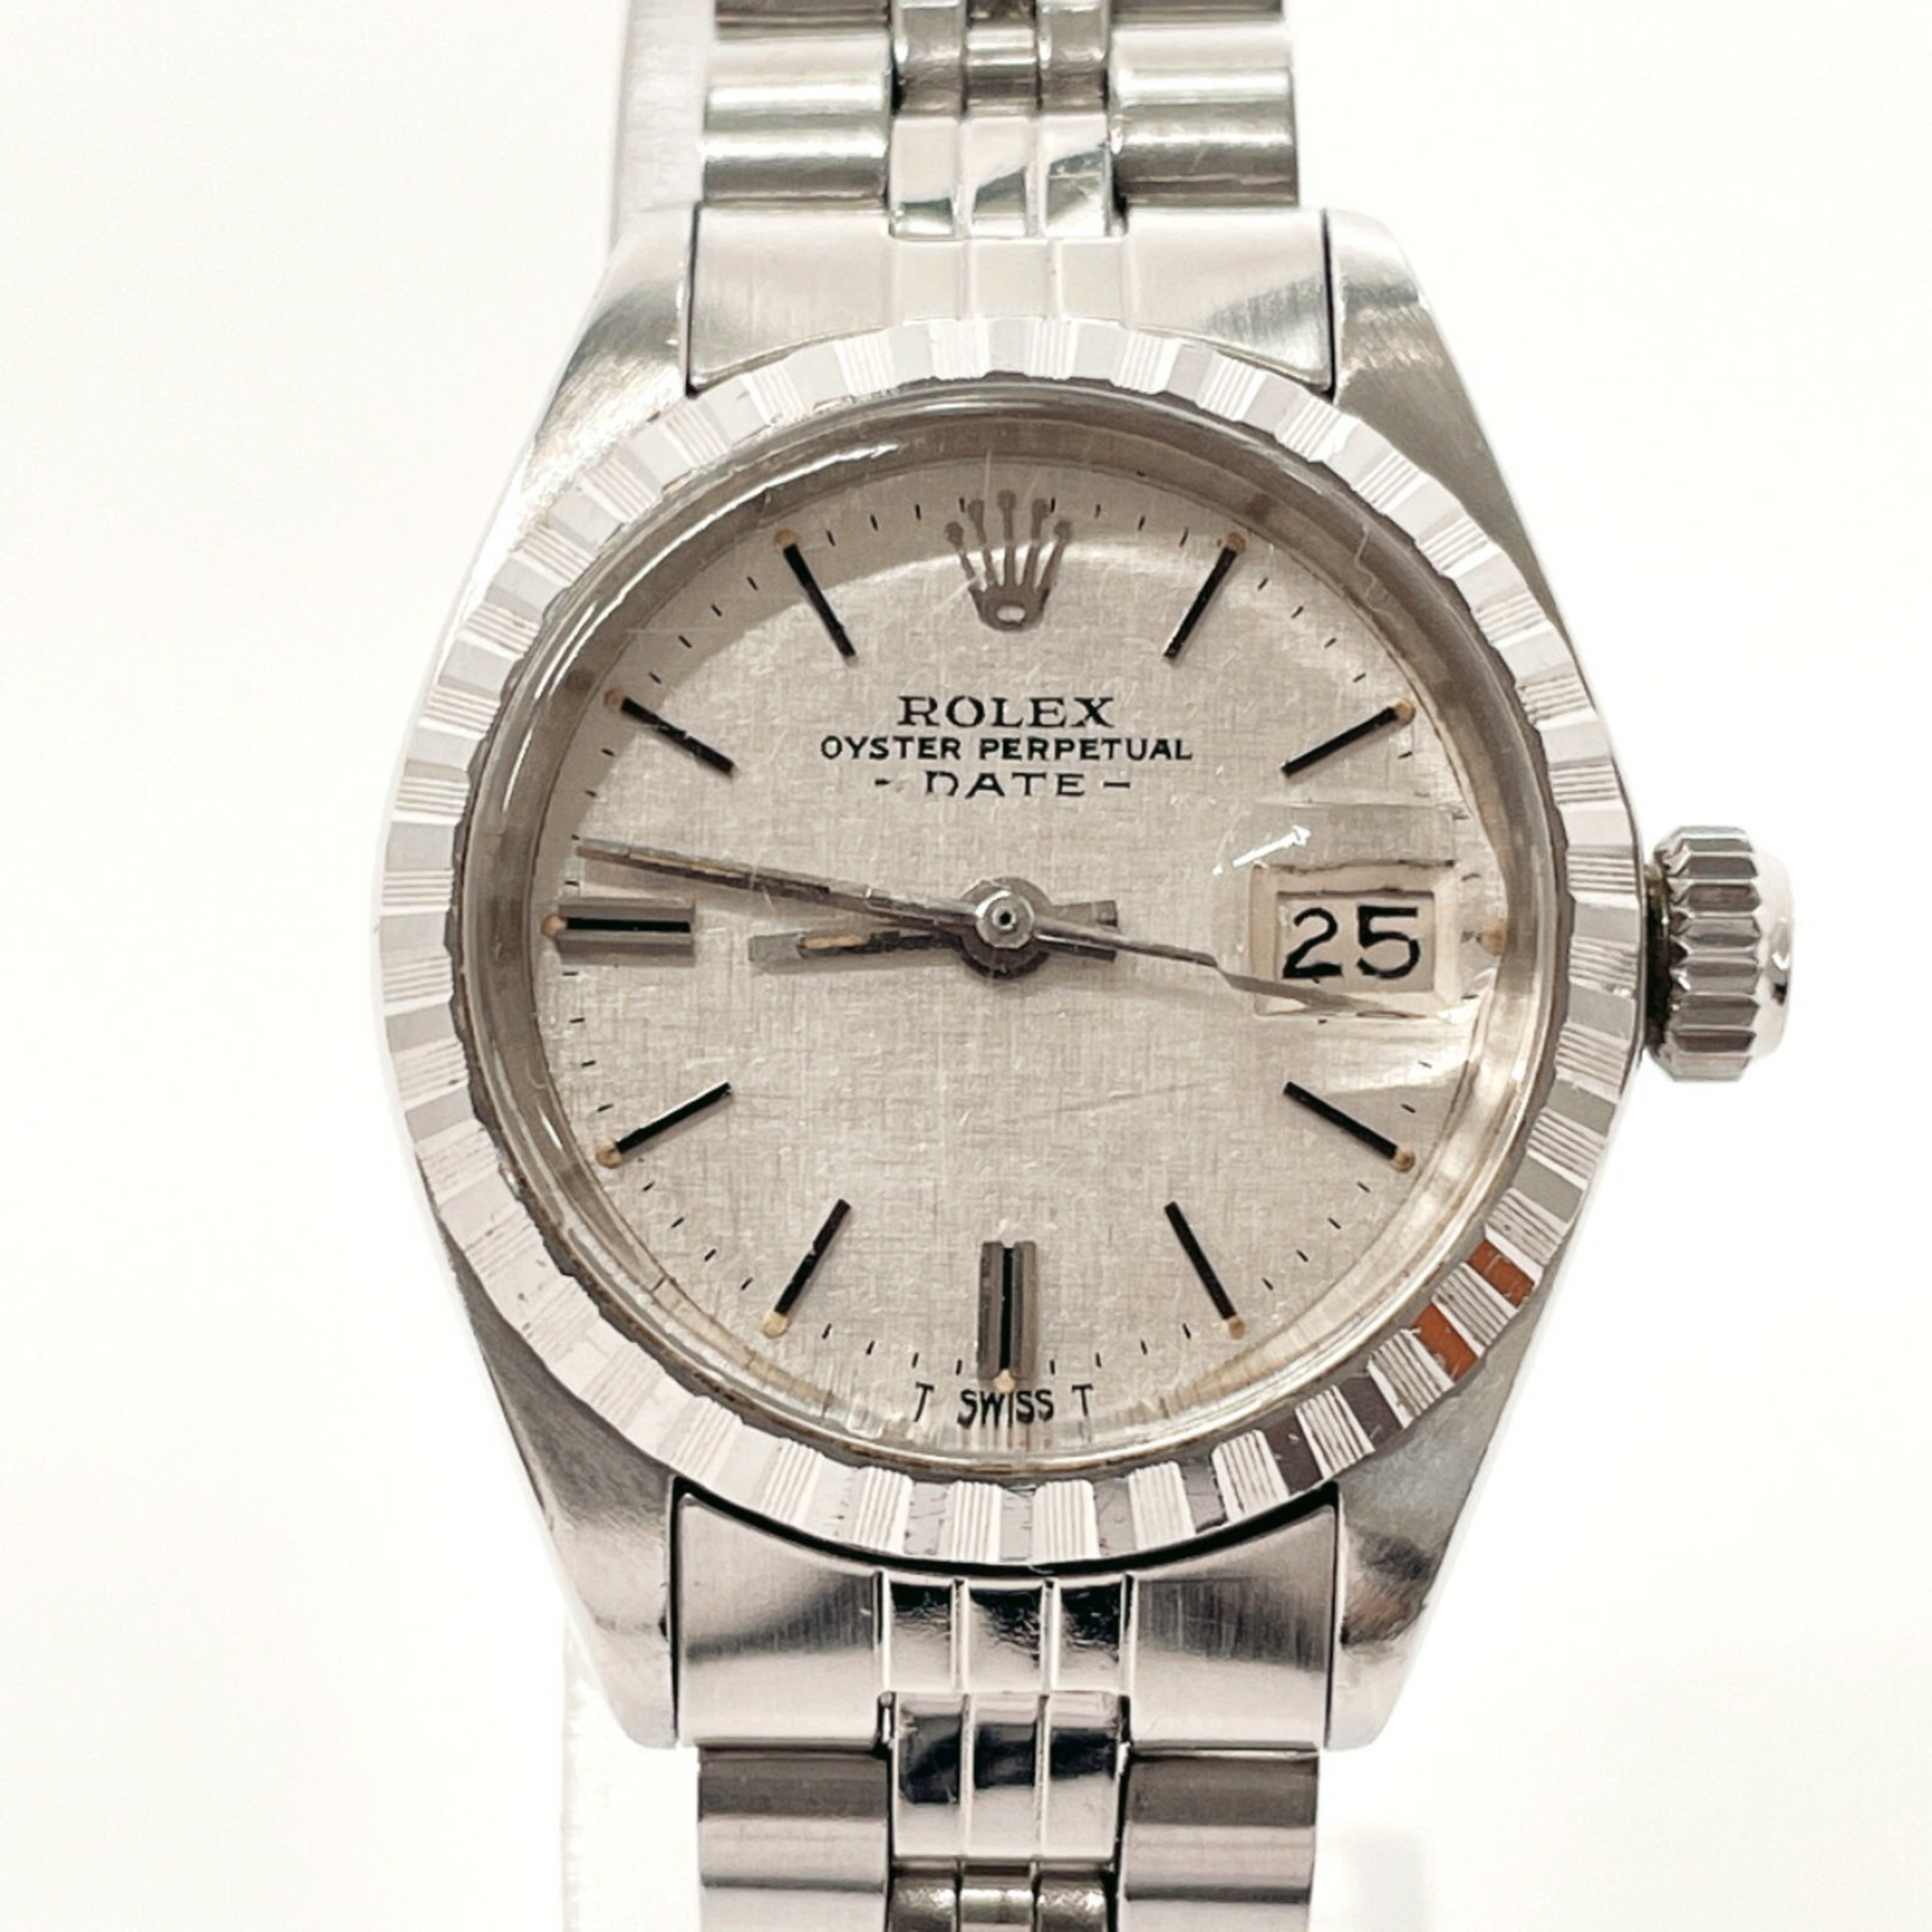 ROLEX Oyster Perpetual Date 6924 (back cover 6919) Watch Stainless Steel Silver Automatic Winding Dial Ladies